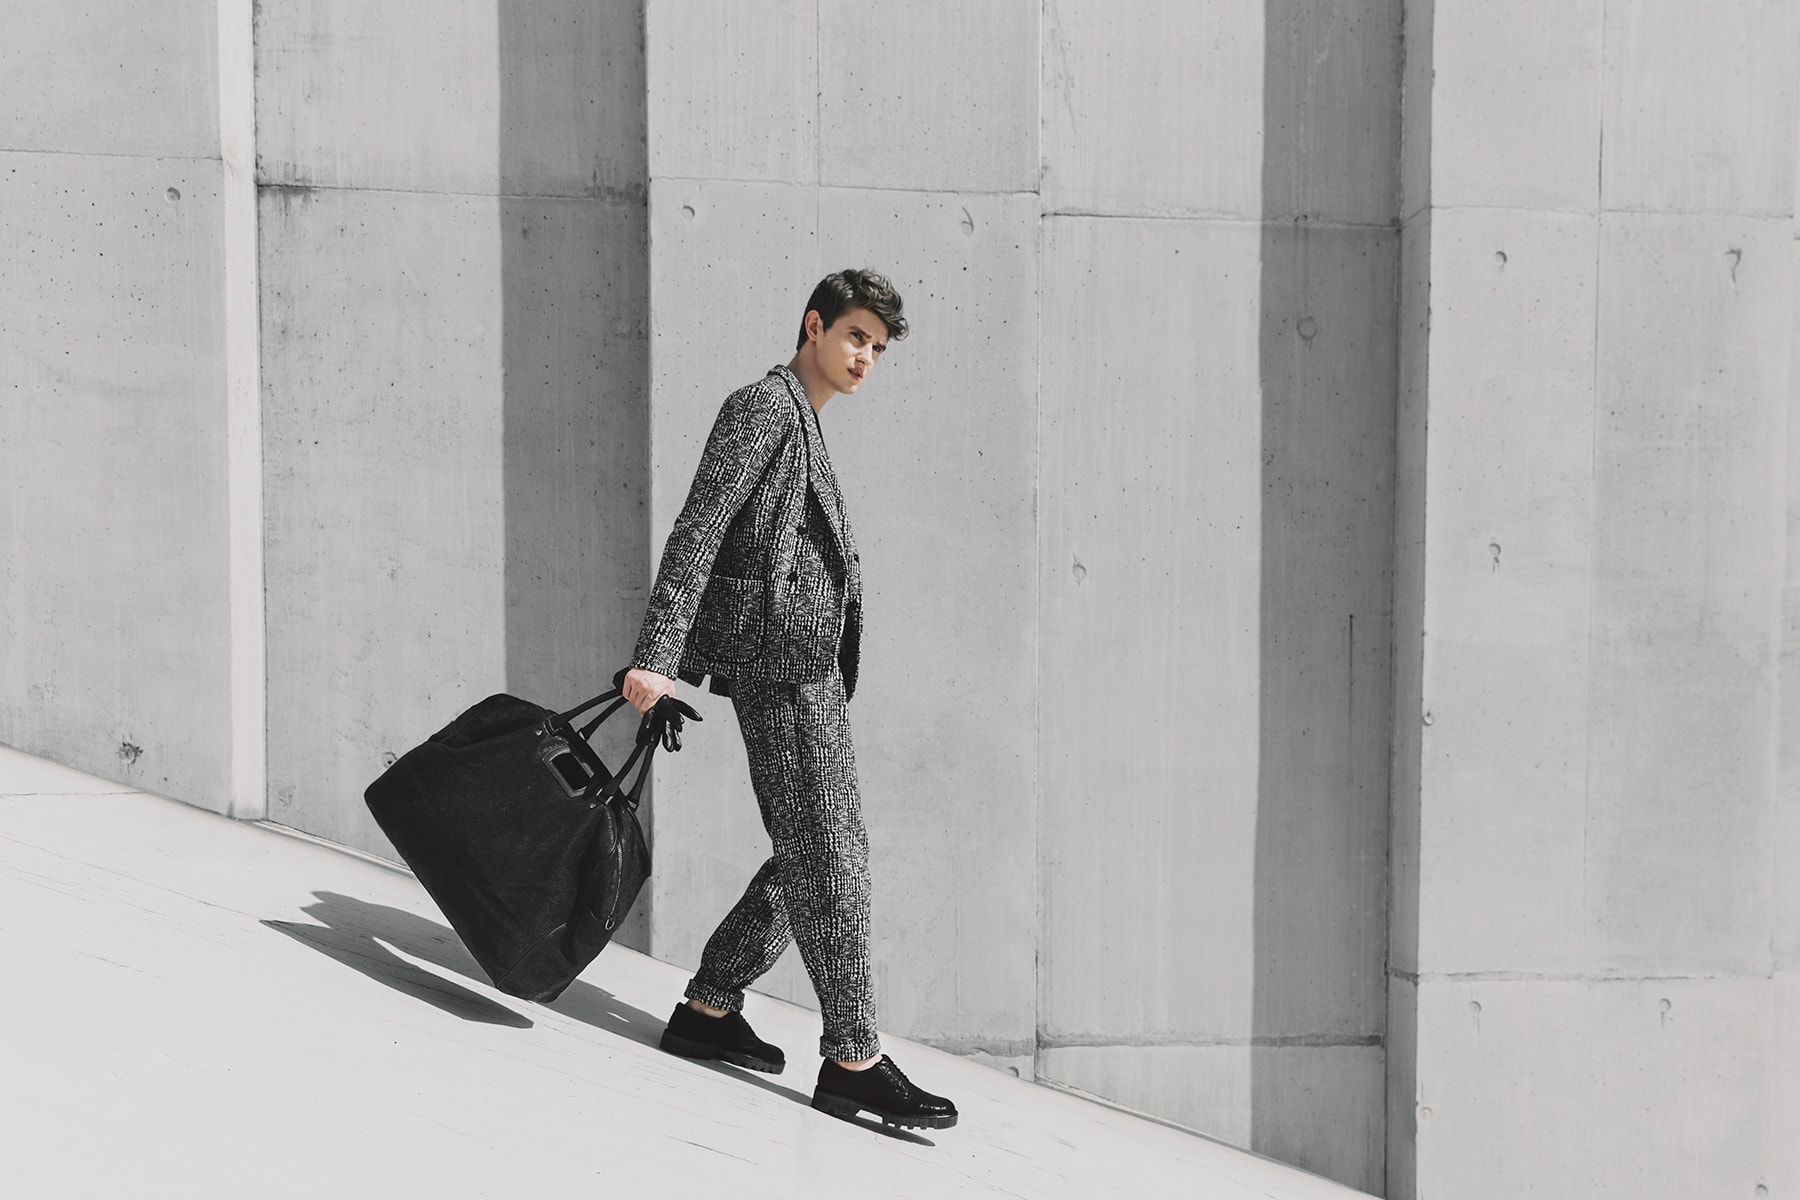 Armani Updates its 2016 Fall Winter Collection